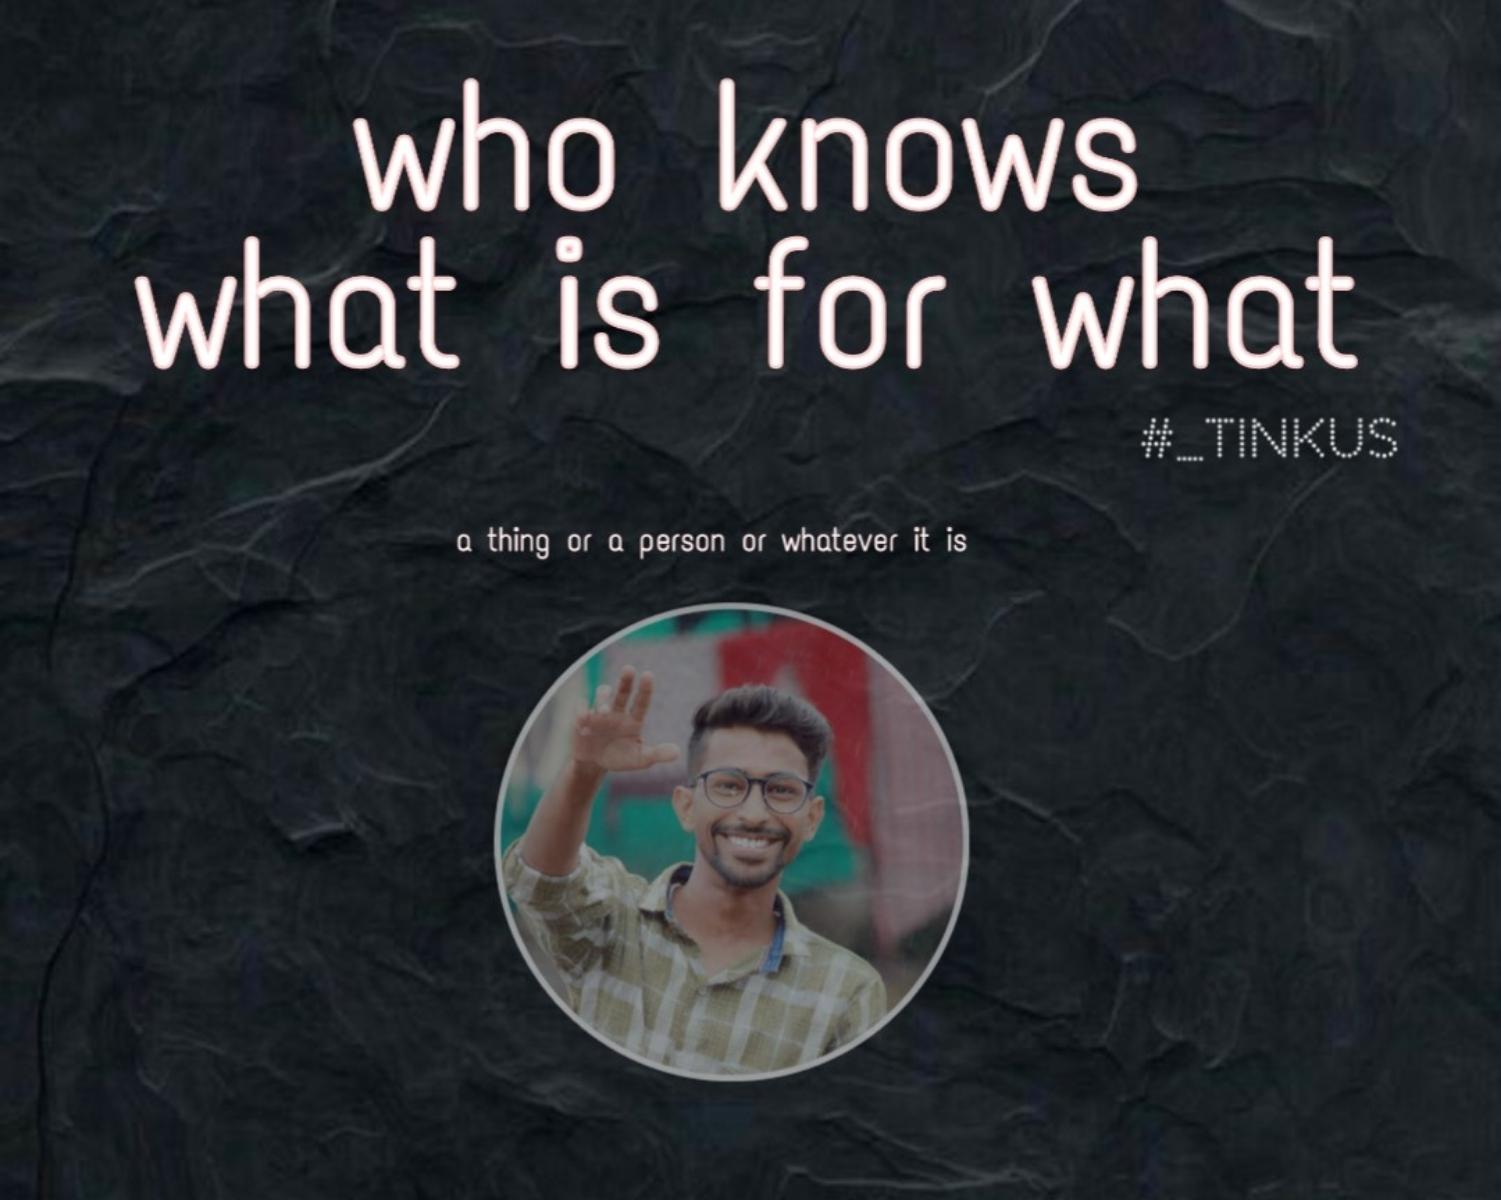 We Never Know What Is For What. #_tinkus.